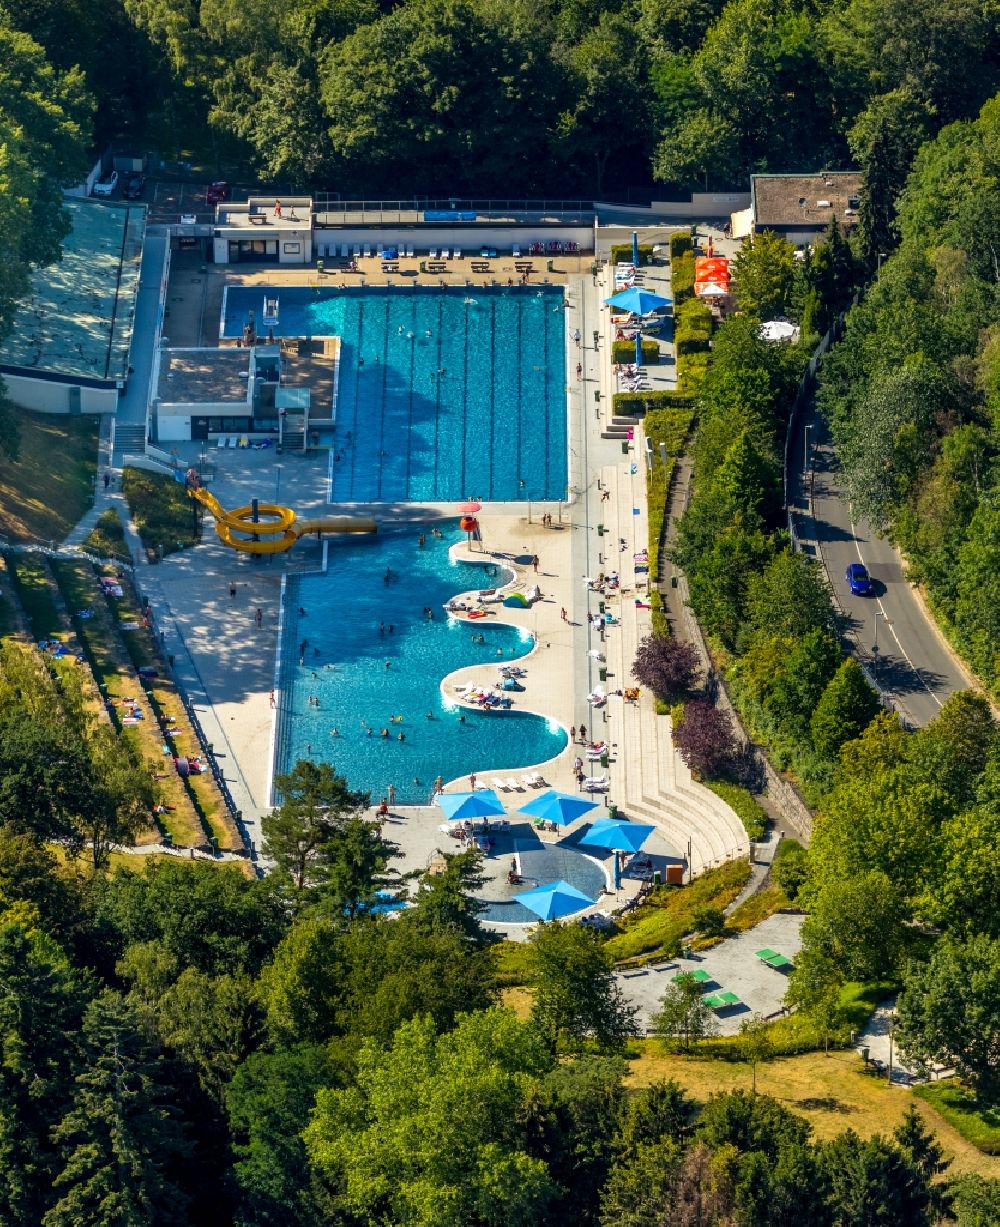 Witten from above - Swimming pool of the of Freibad Annen on Herdecker Street in Witten in the state North Rhine-Westphalia, Germany